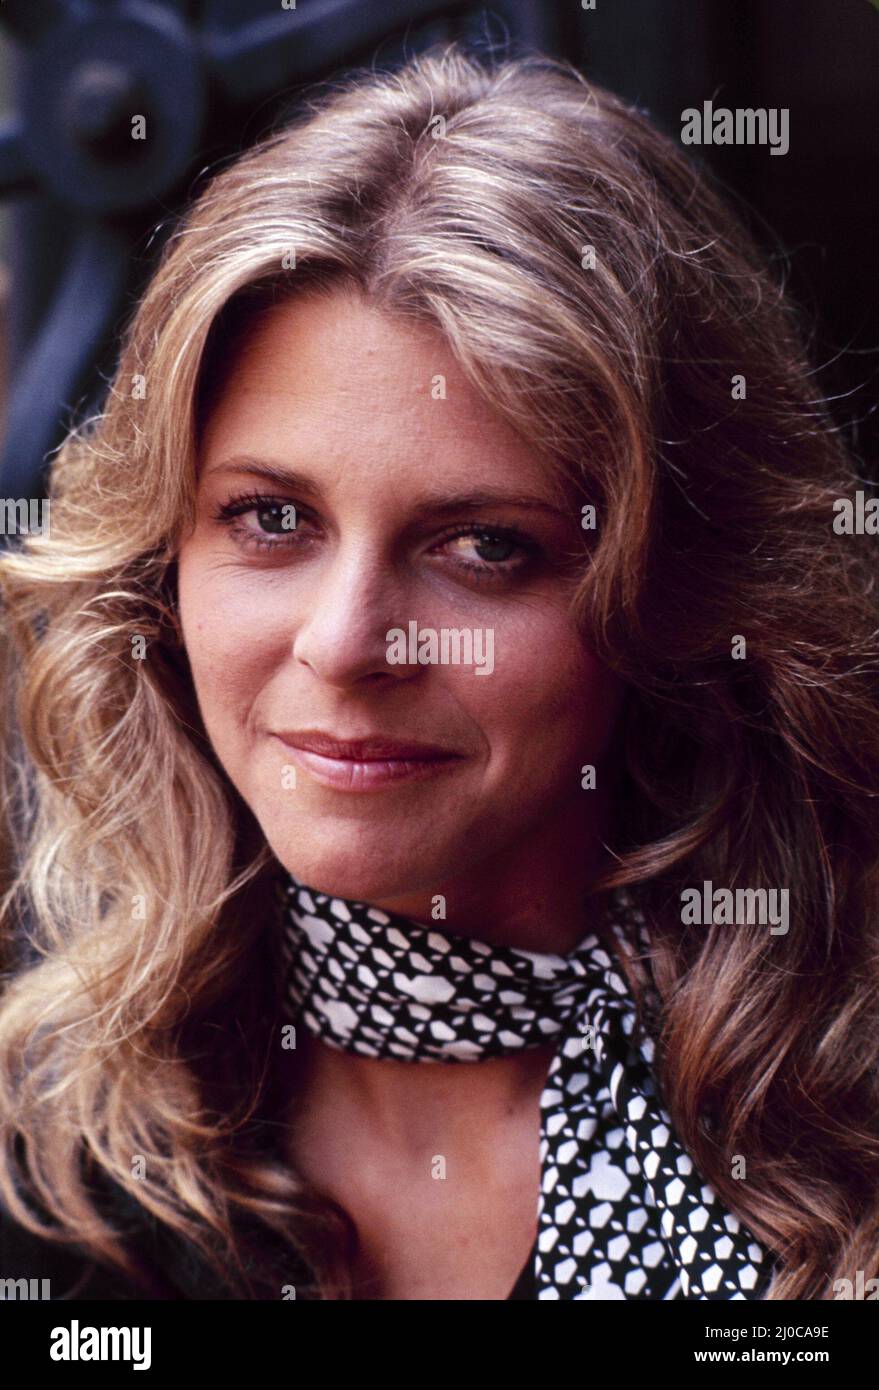 https://c8.alamy.com/comp/2J0CA9E/lindsay-wagner-in-the-six-million-dollar-man-1974-directed-by-richard-donner-richard-irving-jerry-london-and-ernest-pintoff-credit-universal-pictures-television-album-2J0CA9E.jpg